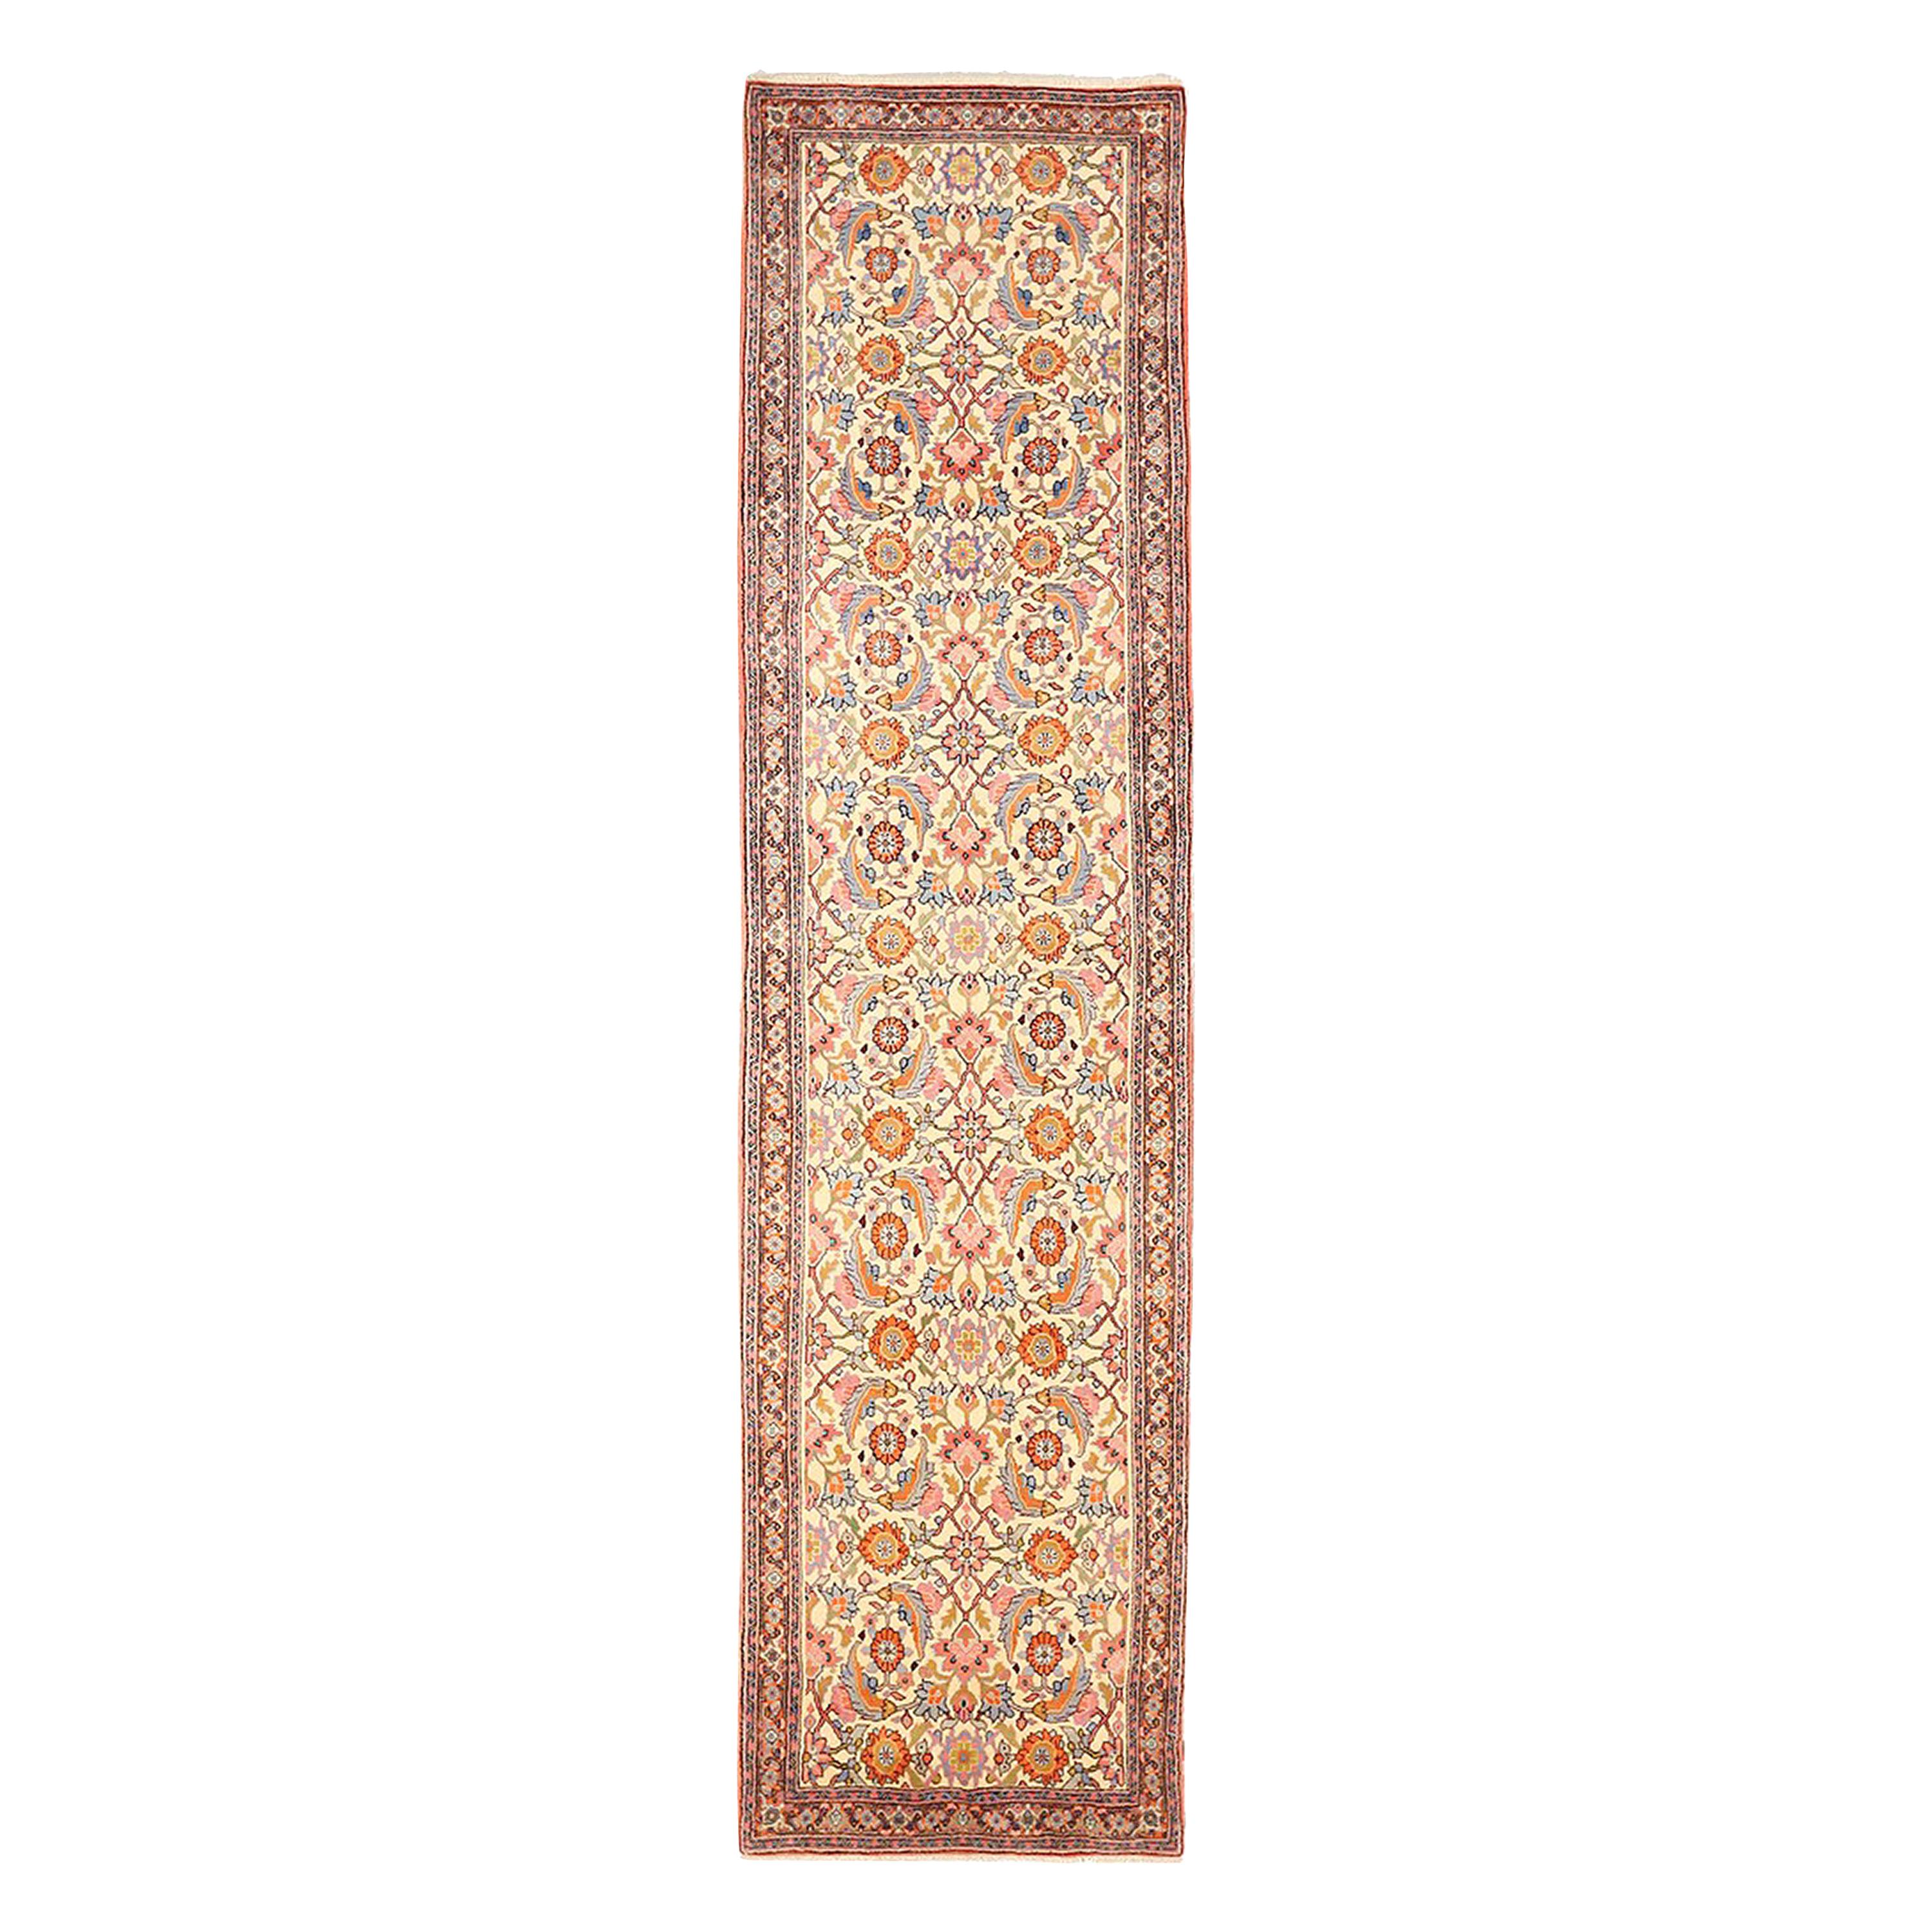 Vintage Persian Bijar Runner Rug with Pink and Gray Floral Patterns For Sale